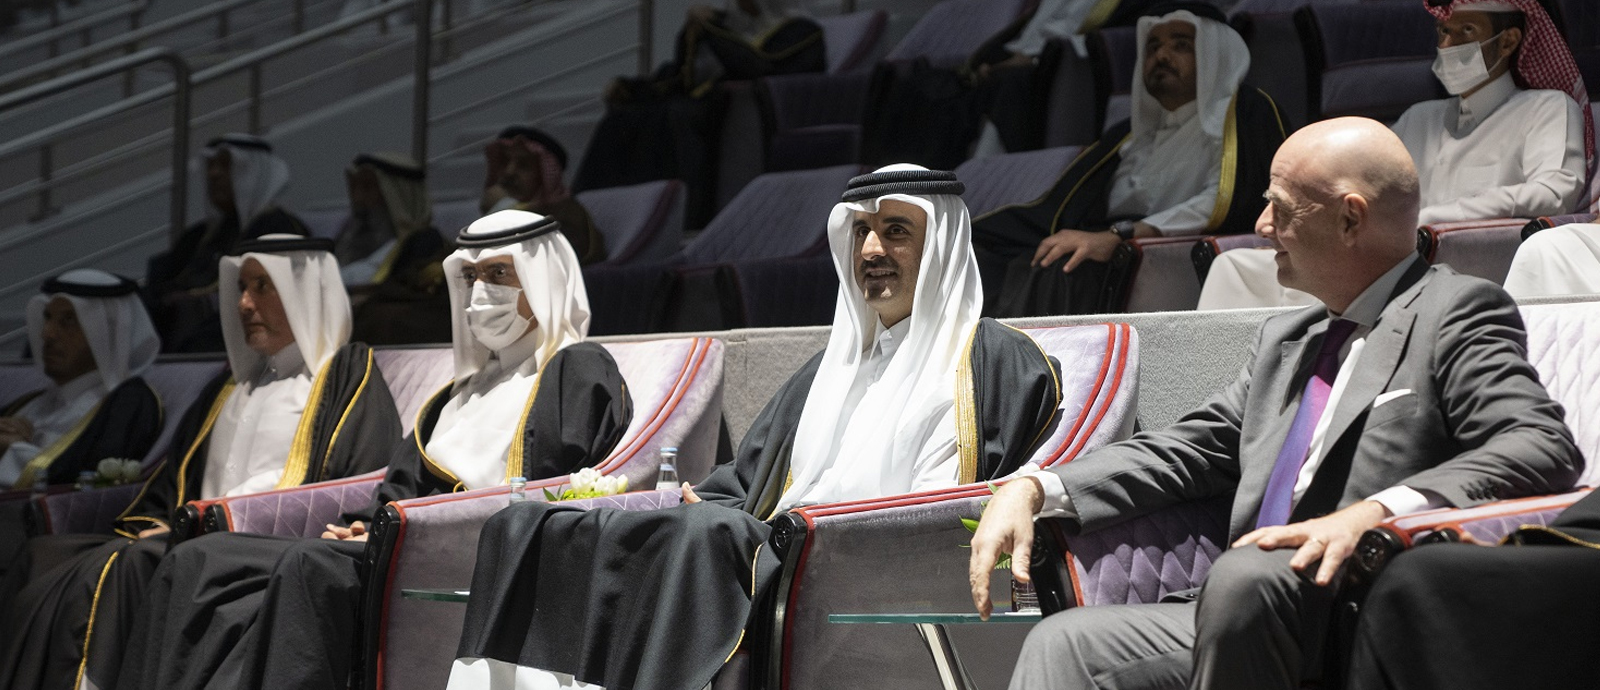 HH the Amir Attends Final of 50th Amir Cup